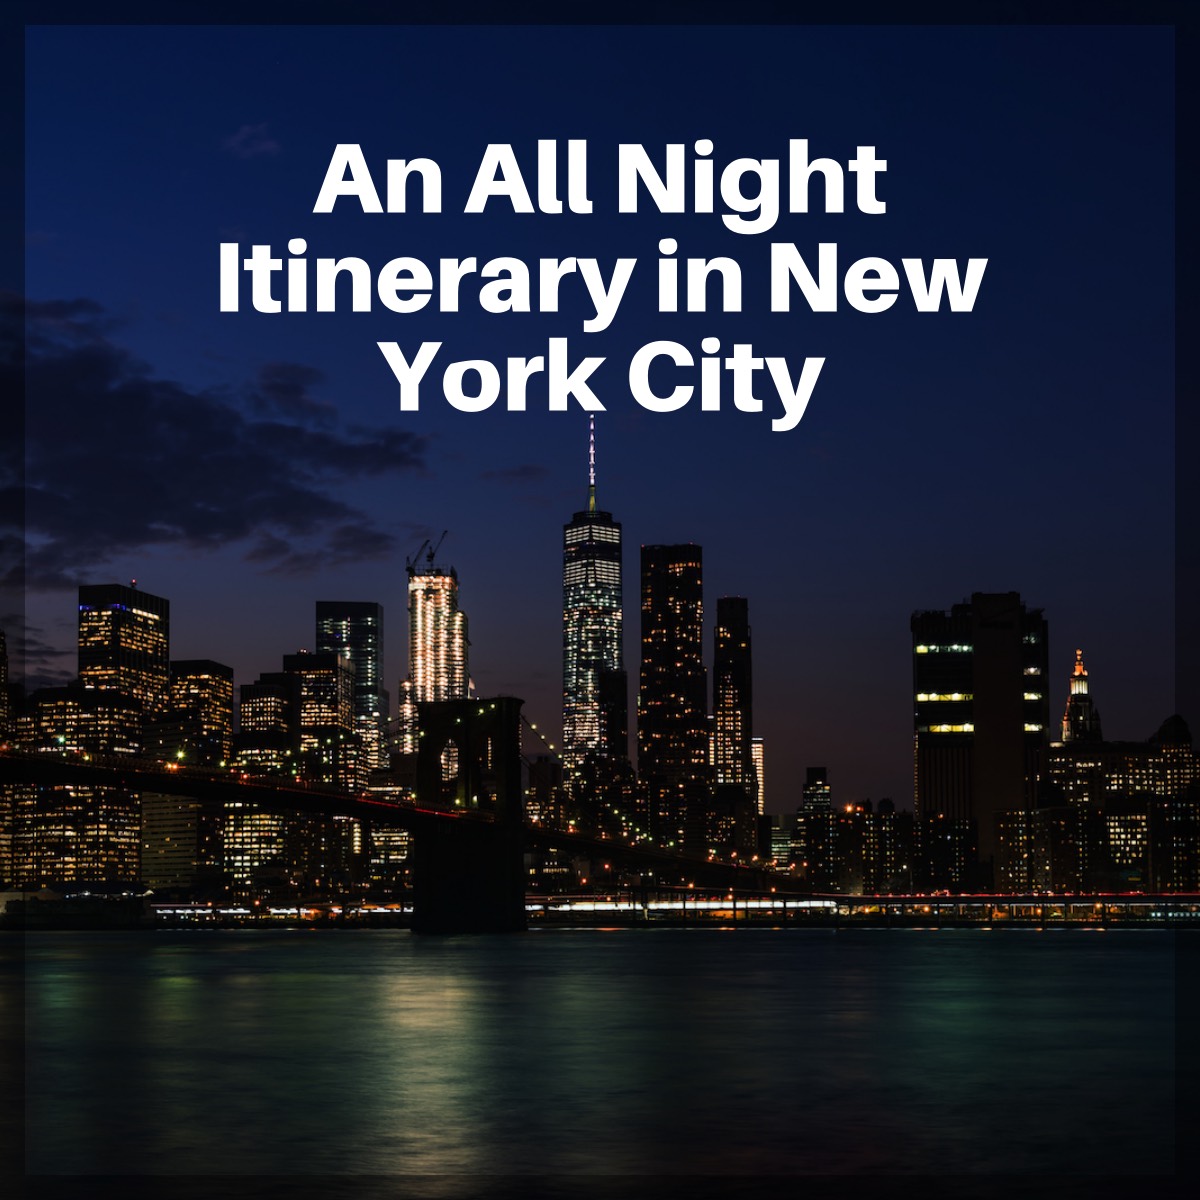 An All Night Itinerary in New York City – The City That Never Sleeps